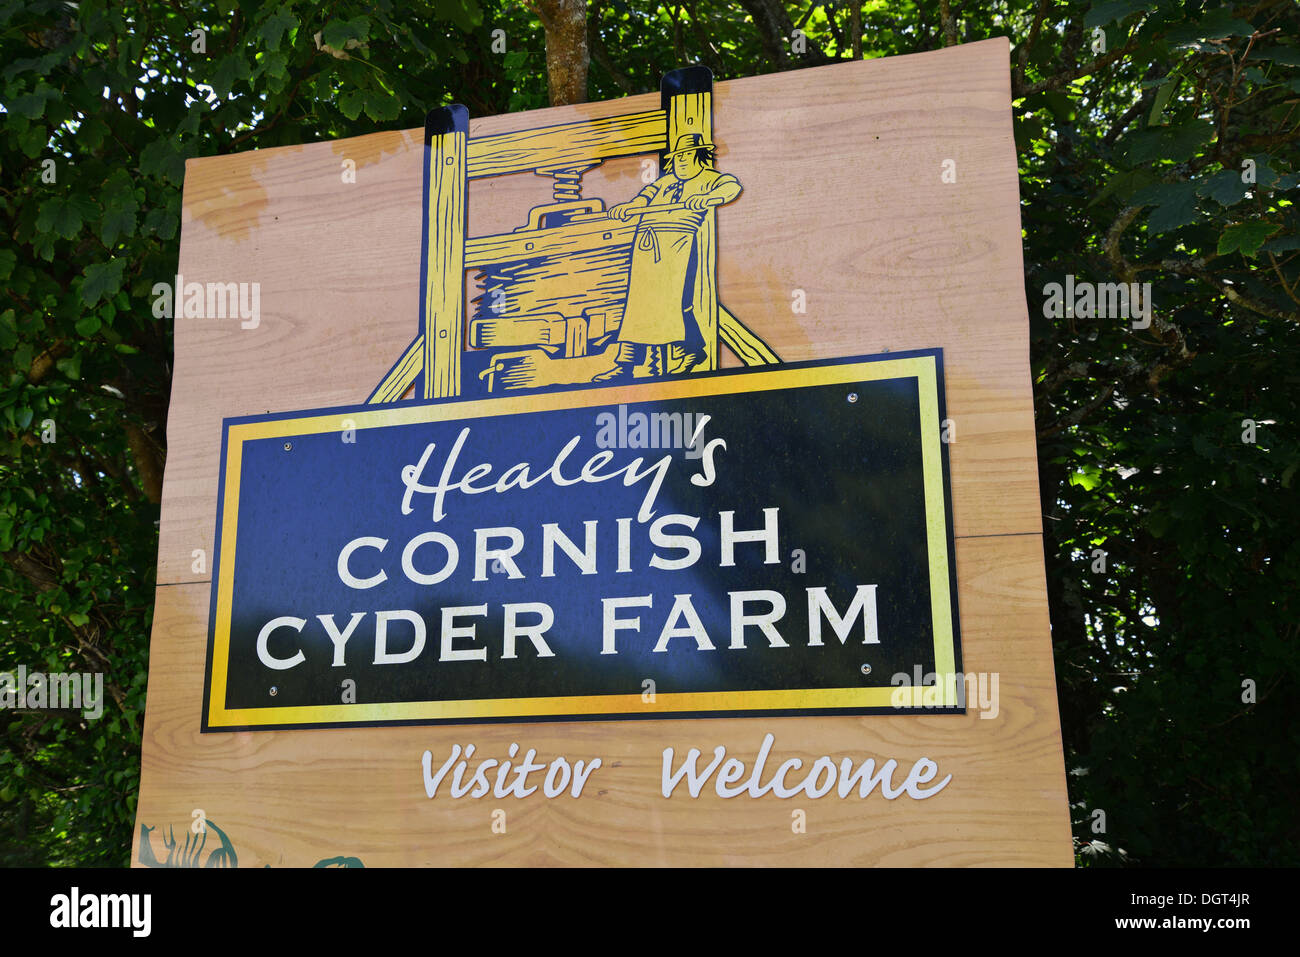 Visitor welcome sign at entrance to Healey's Cornish Cyder Farm, Penhallow, Truro, Cornwall, , England, United Kingdom Stock Photo